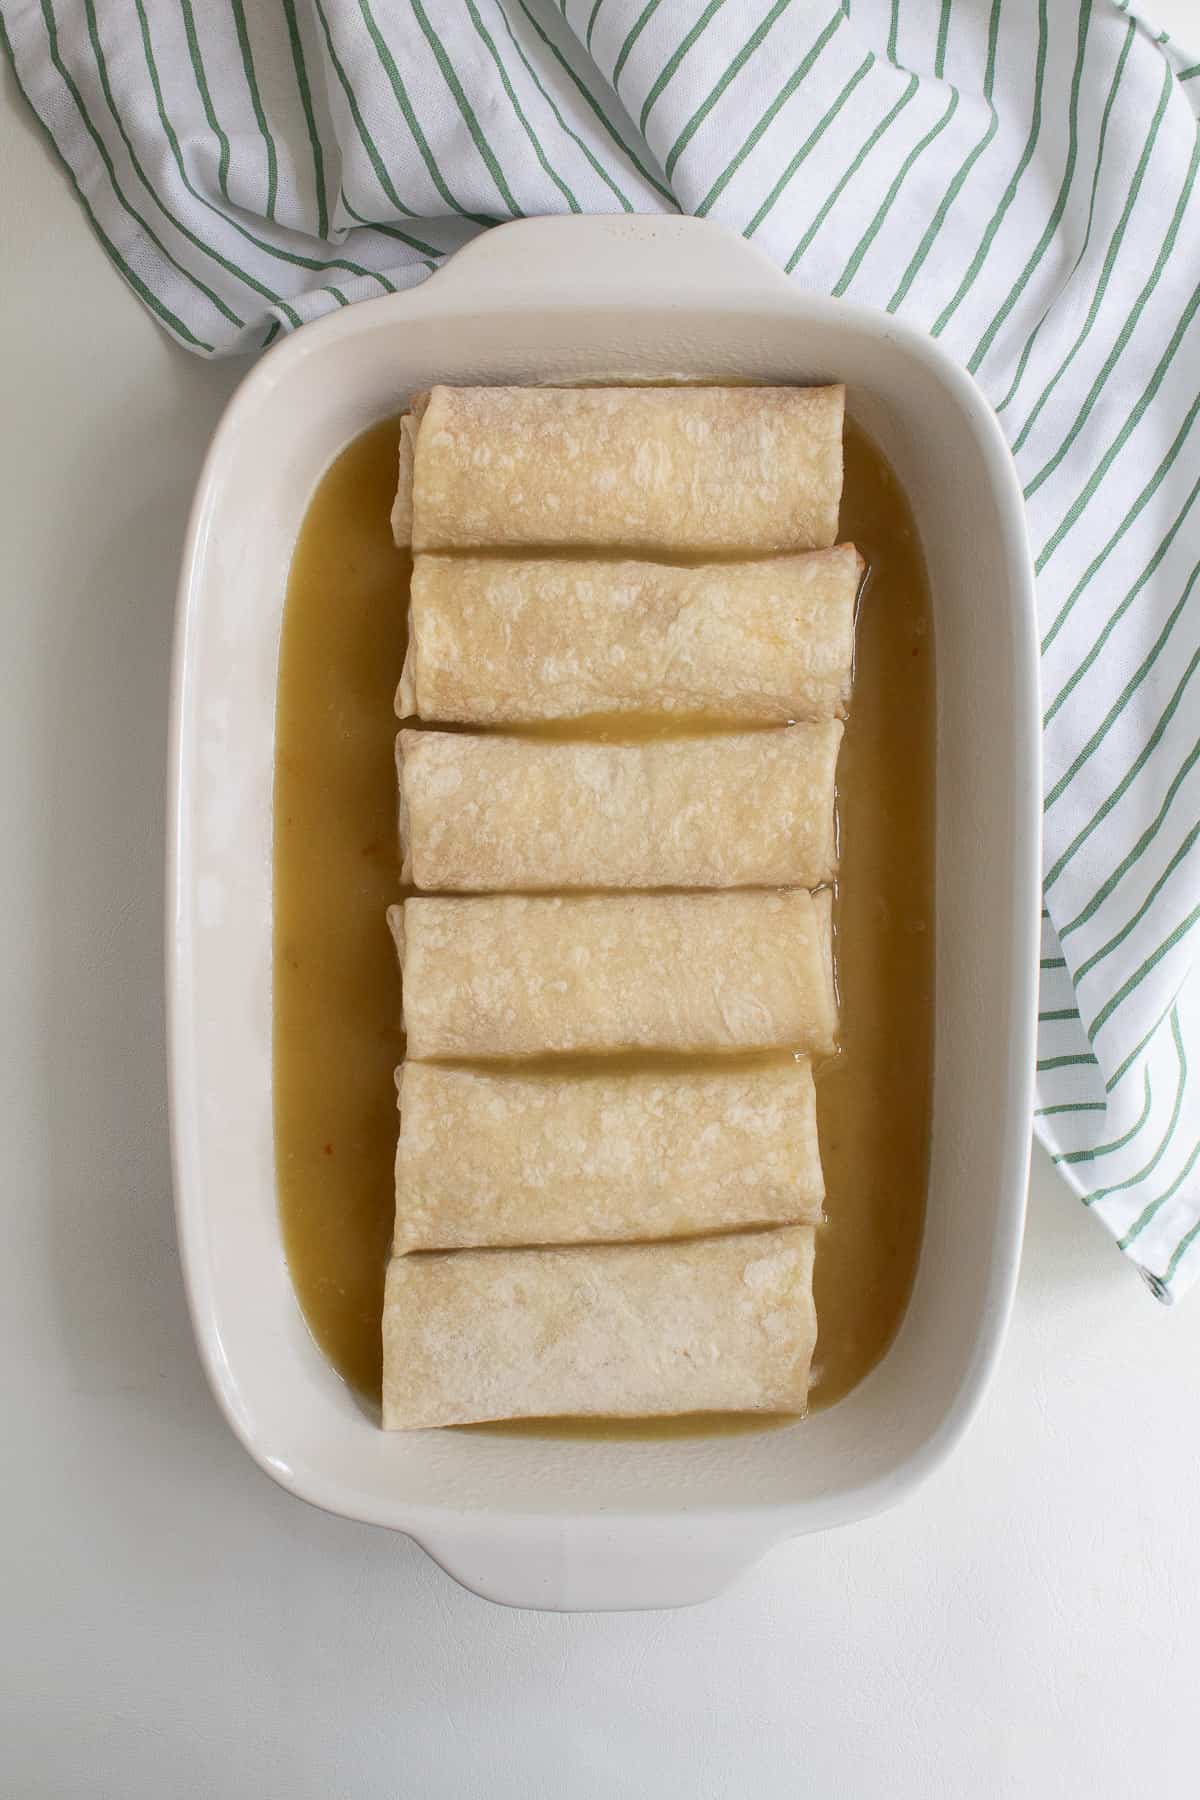 Six burritos are placed on top of a layer of green enchilada sauce in a casserole dish.